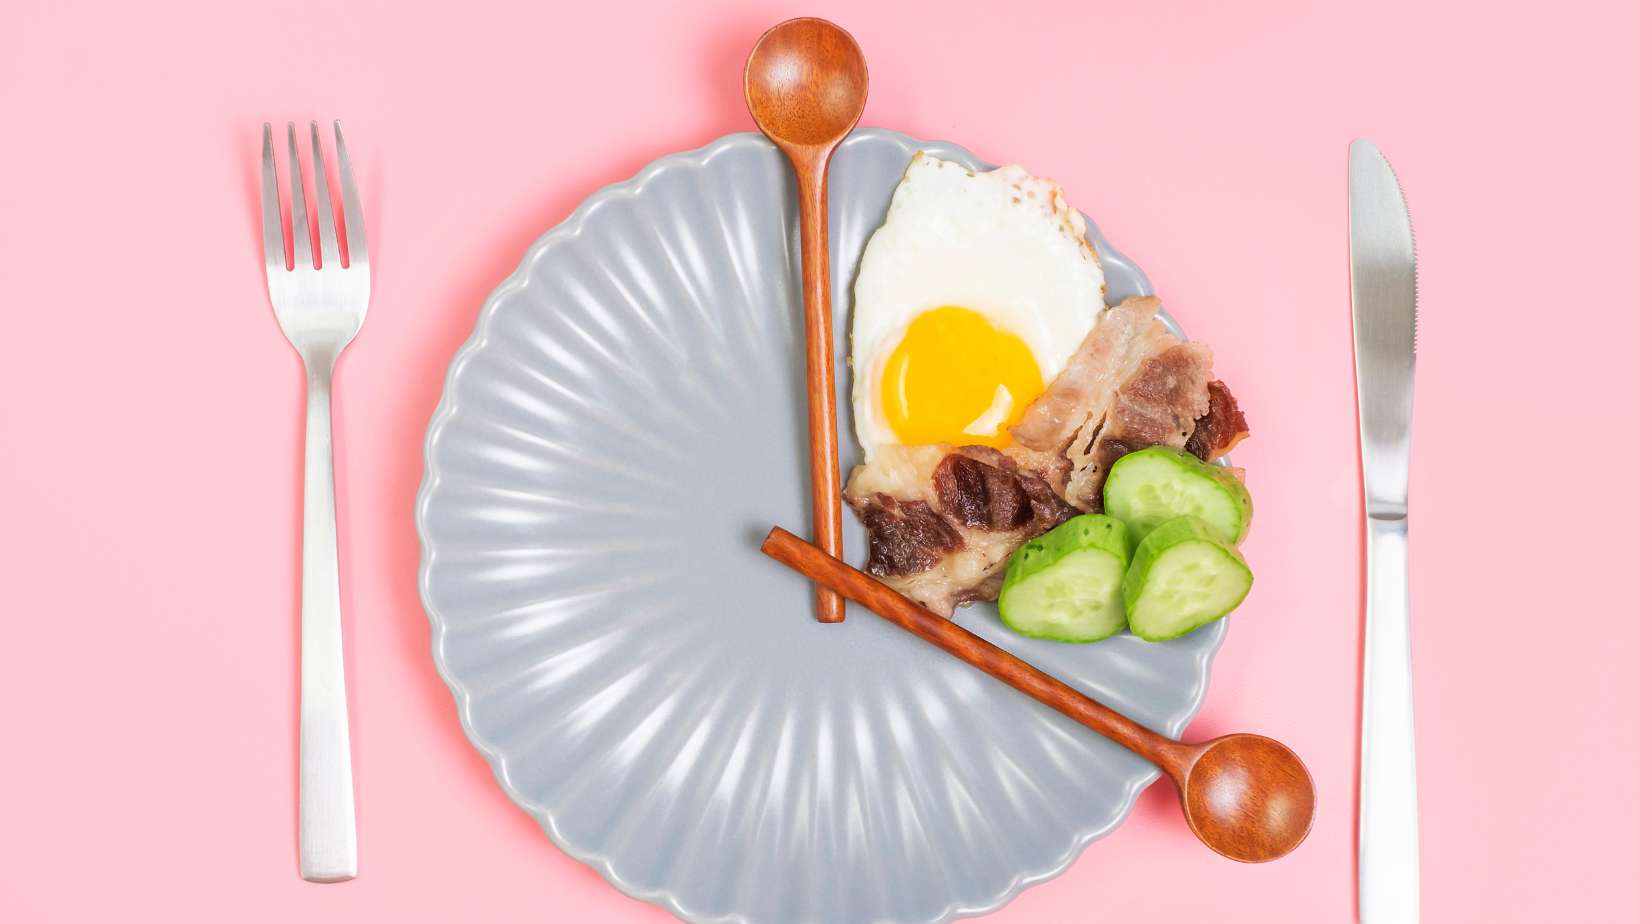 Clock shaped wooden spoons on plate with food on pink background top view, intermittent fasting concept.